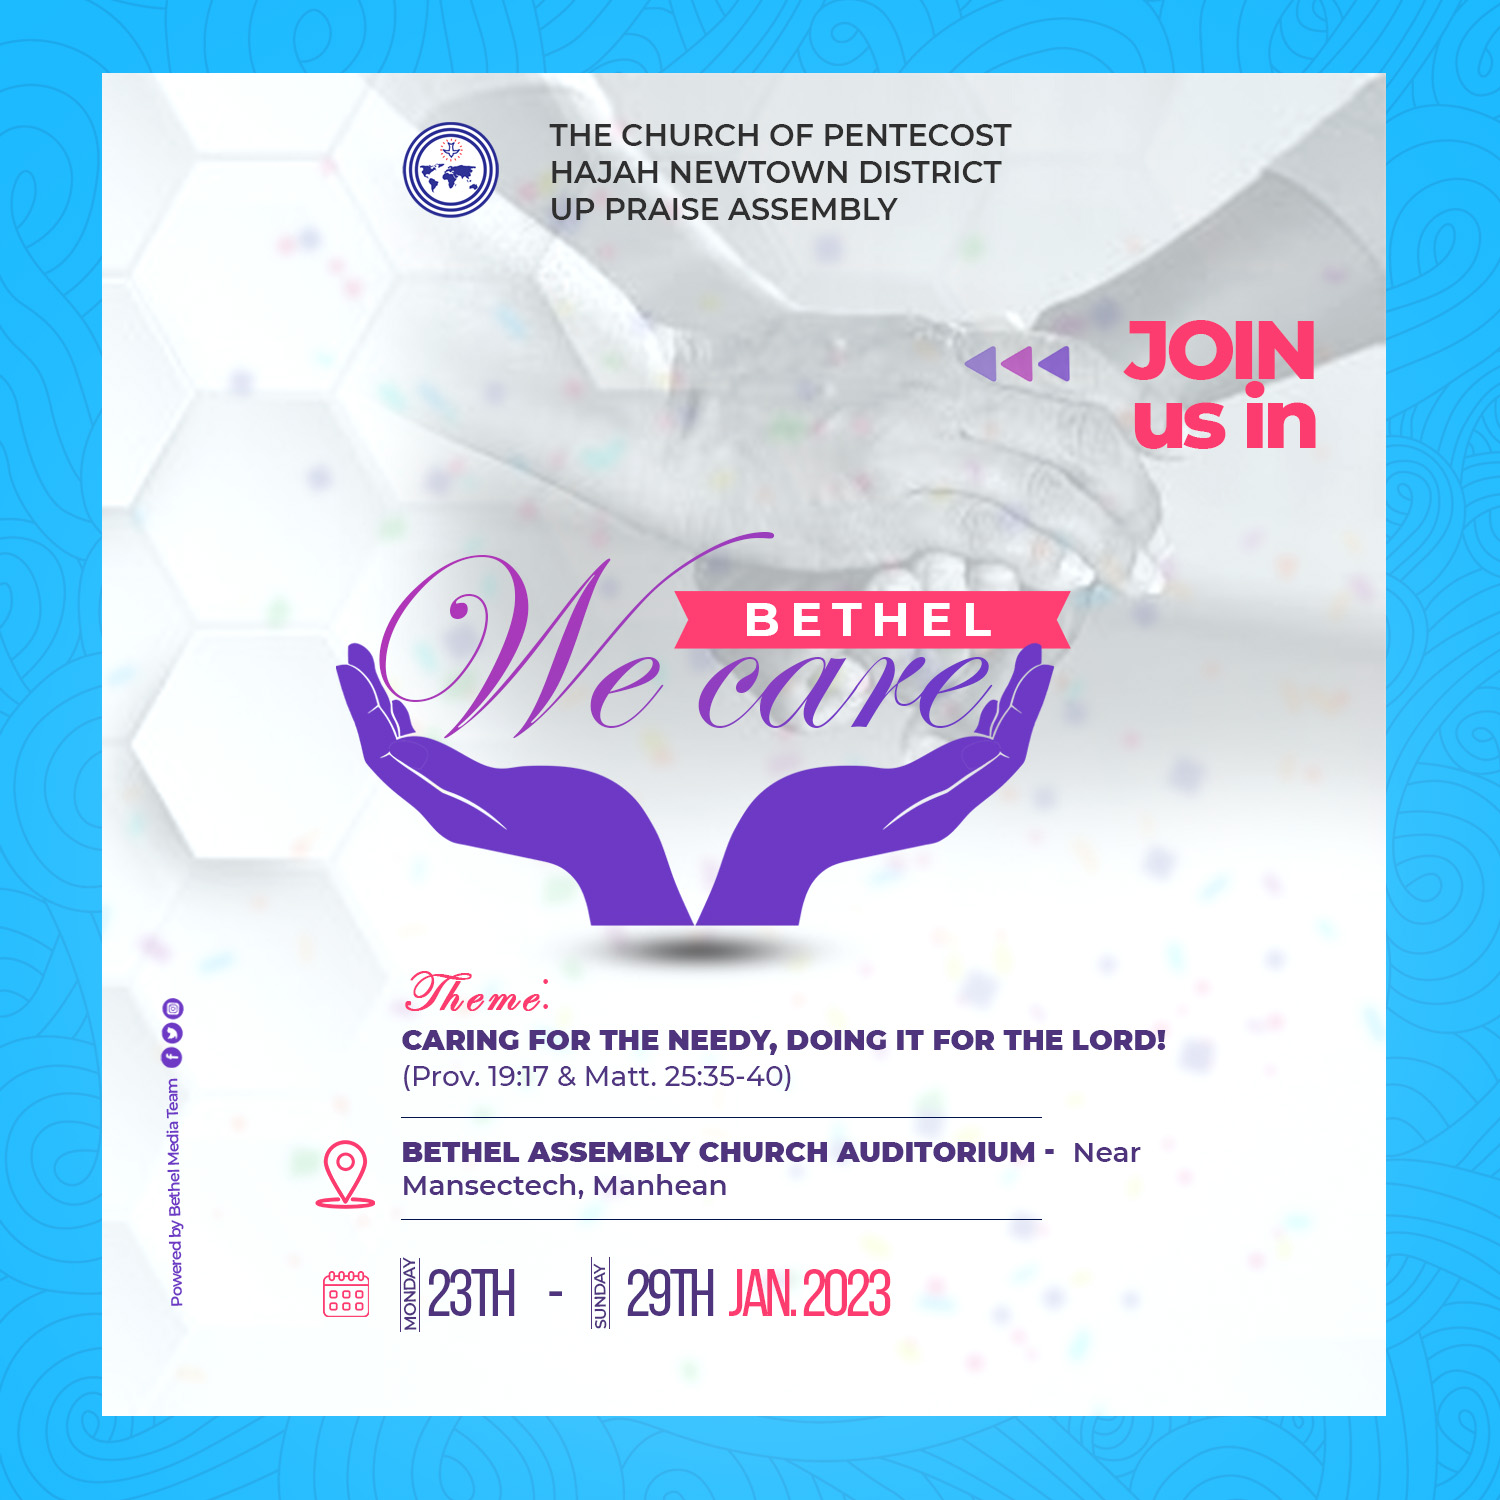 We care church flyer pinterest preview image.